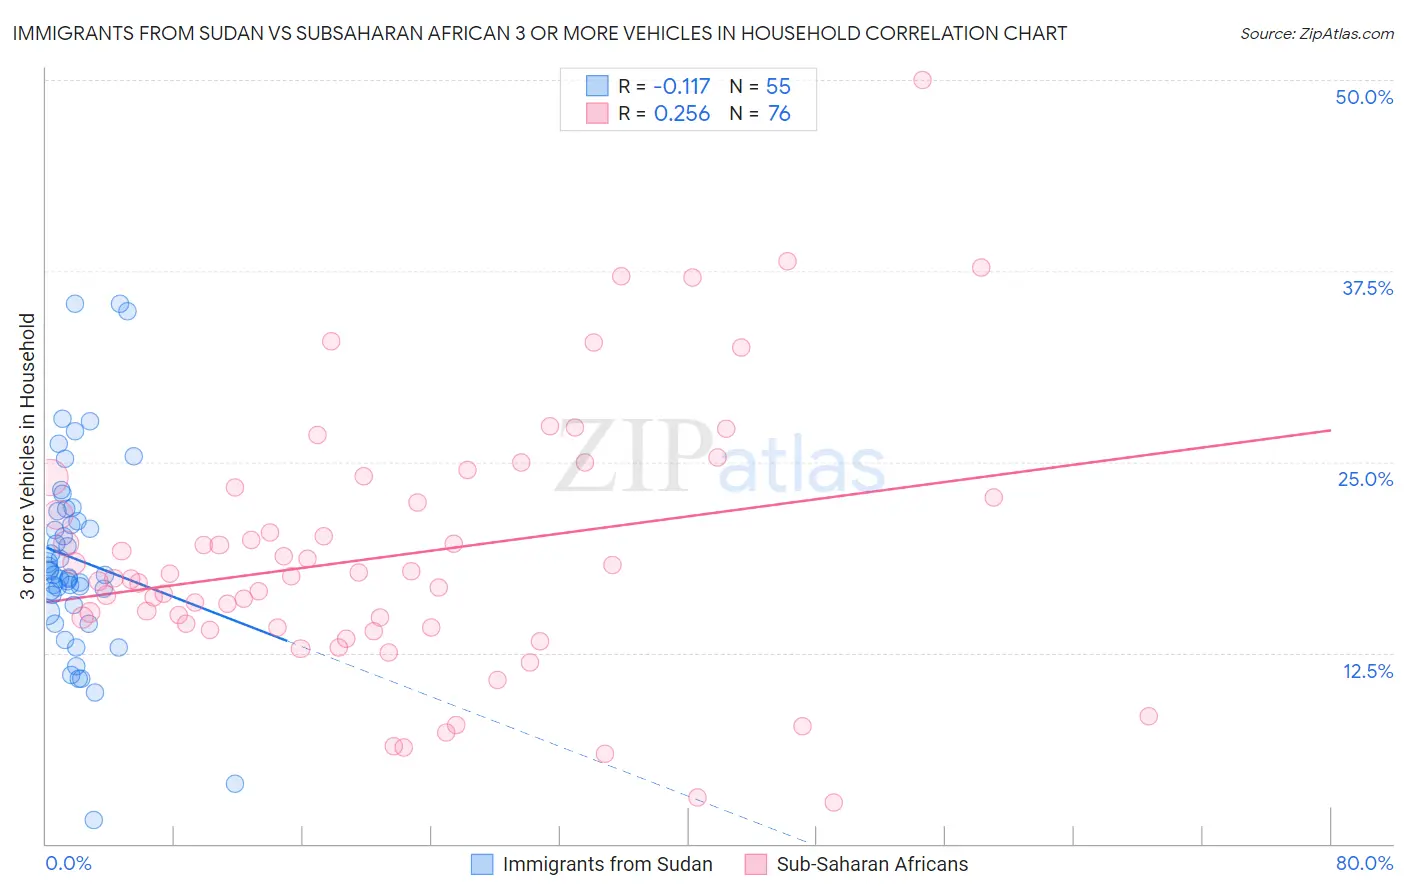 Immigrants from Sudan vs Subsaharan African 3 or more Vehicles in Household